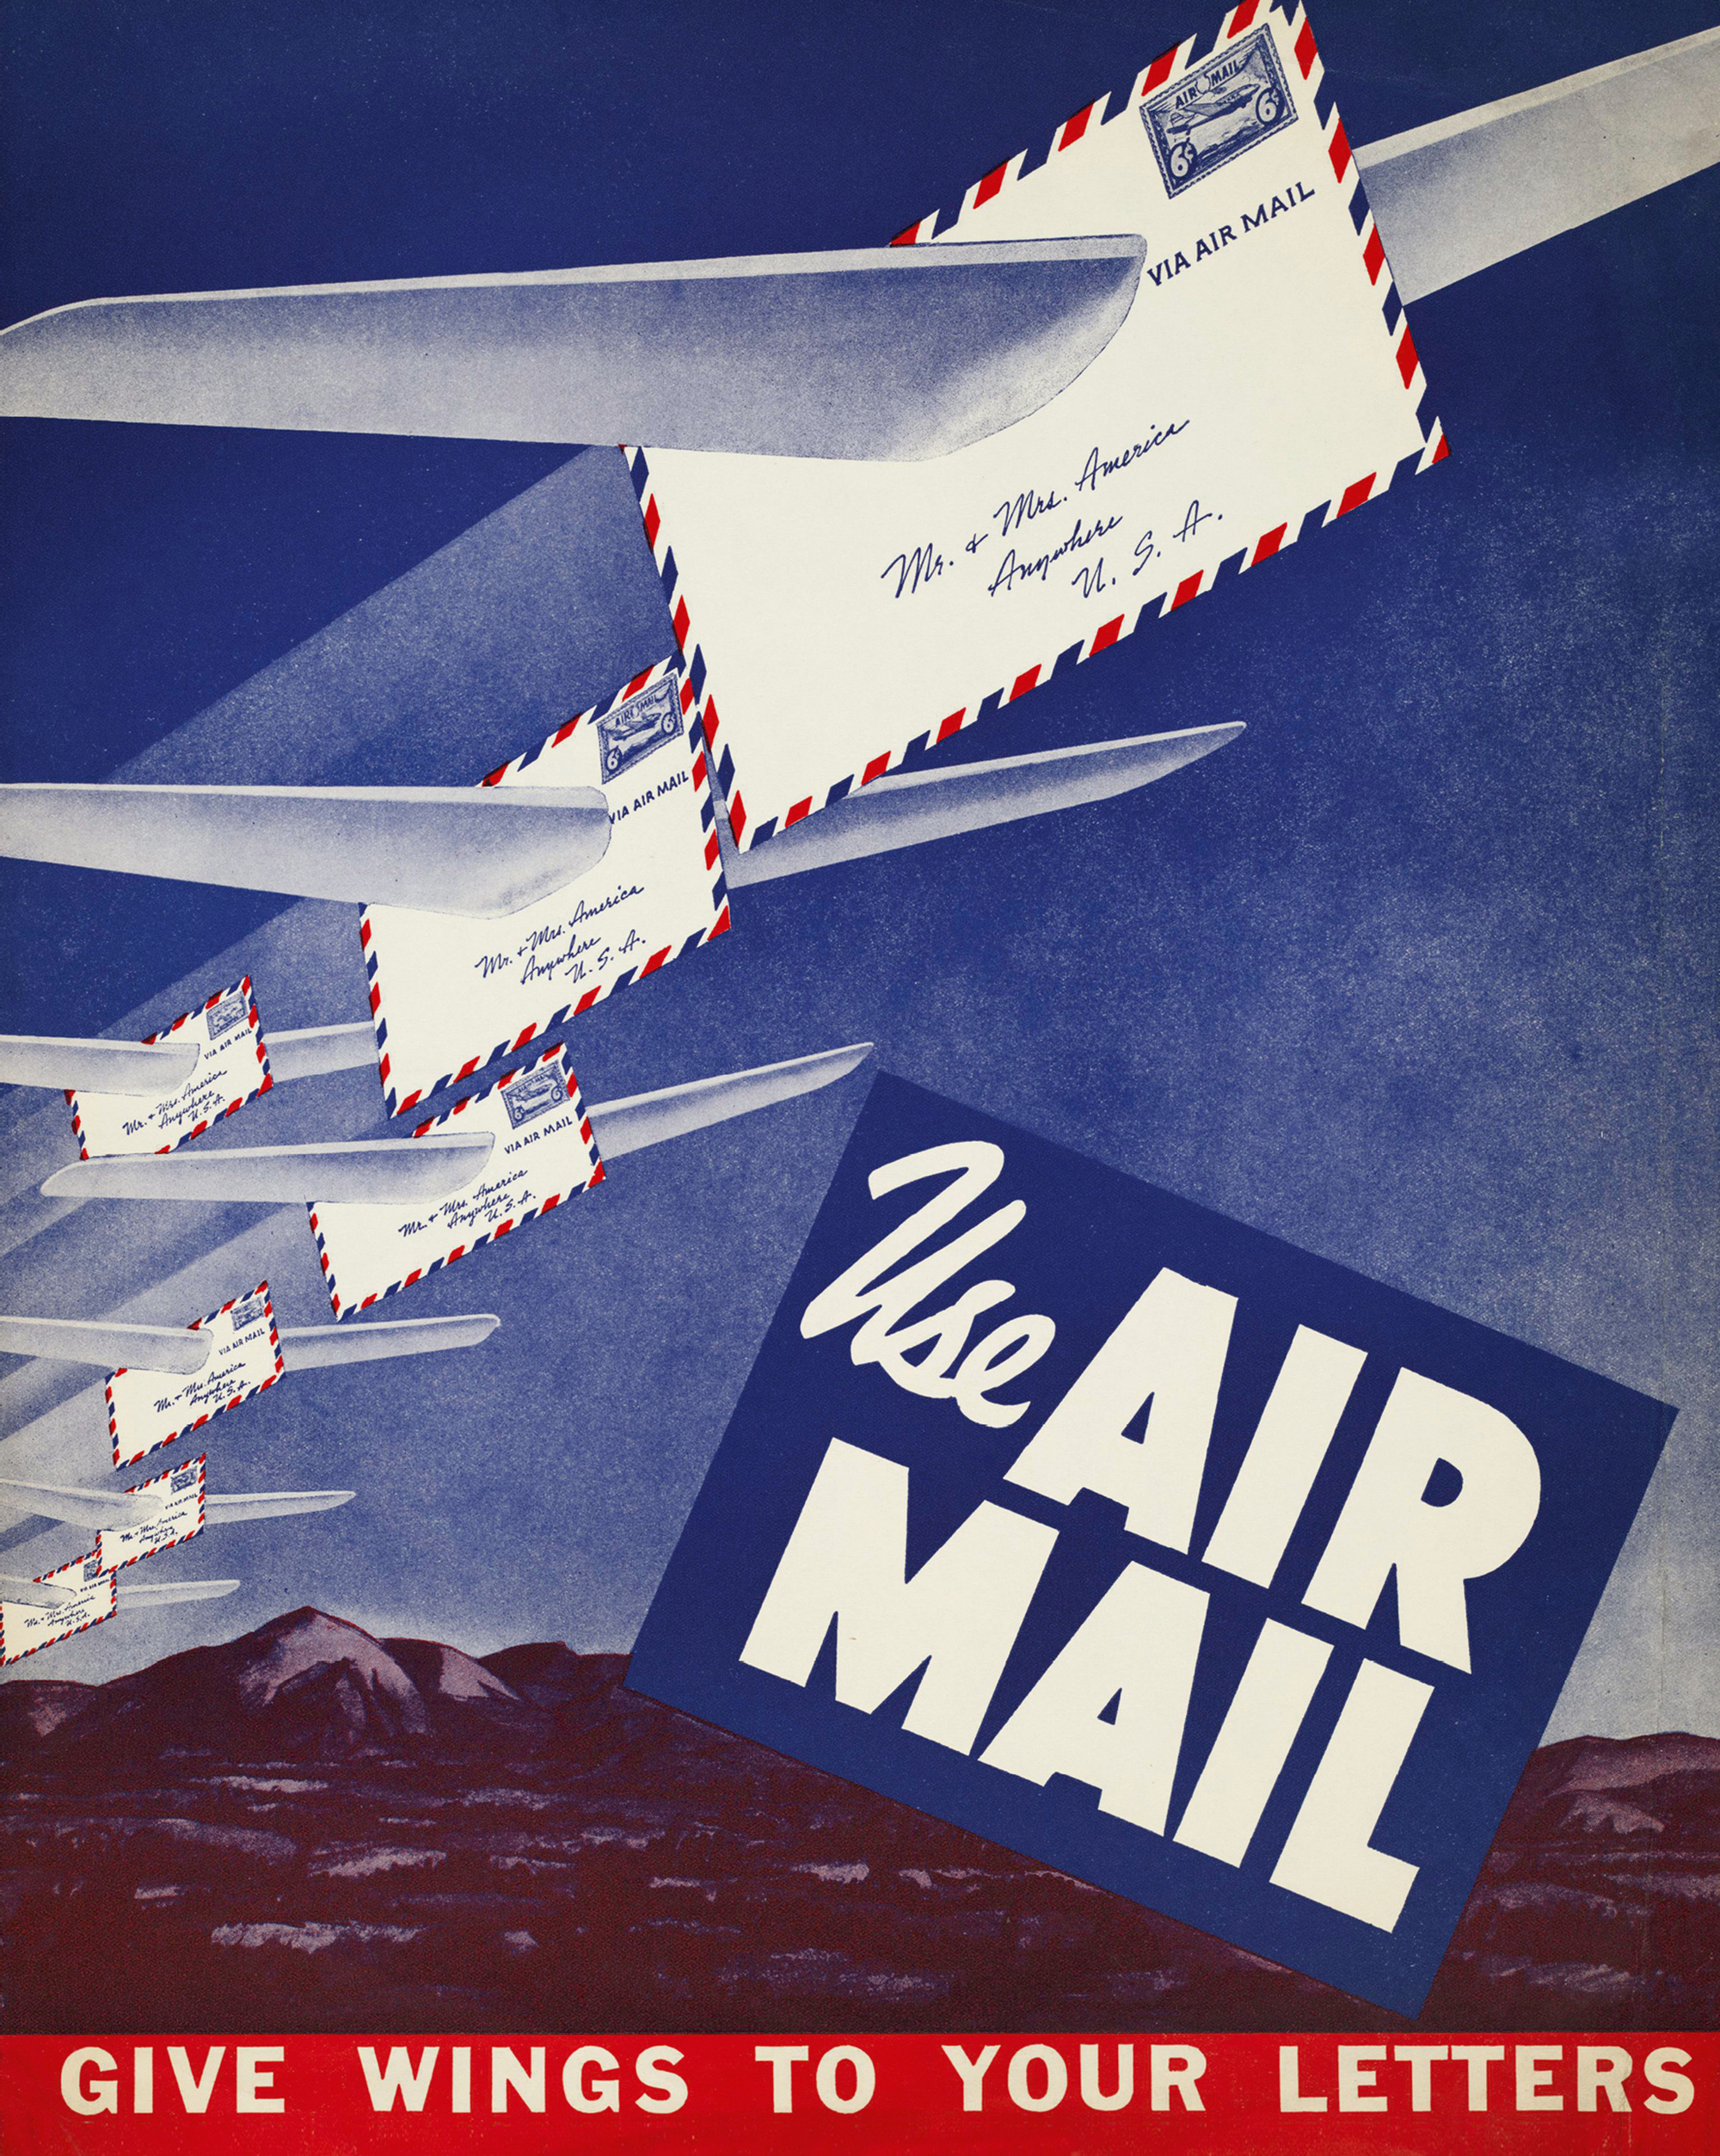 A circa nineteen thirty-nine poster advertising domestic mail. It shows envelopes with wings flying across a landscape. 